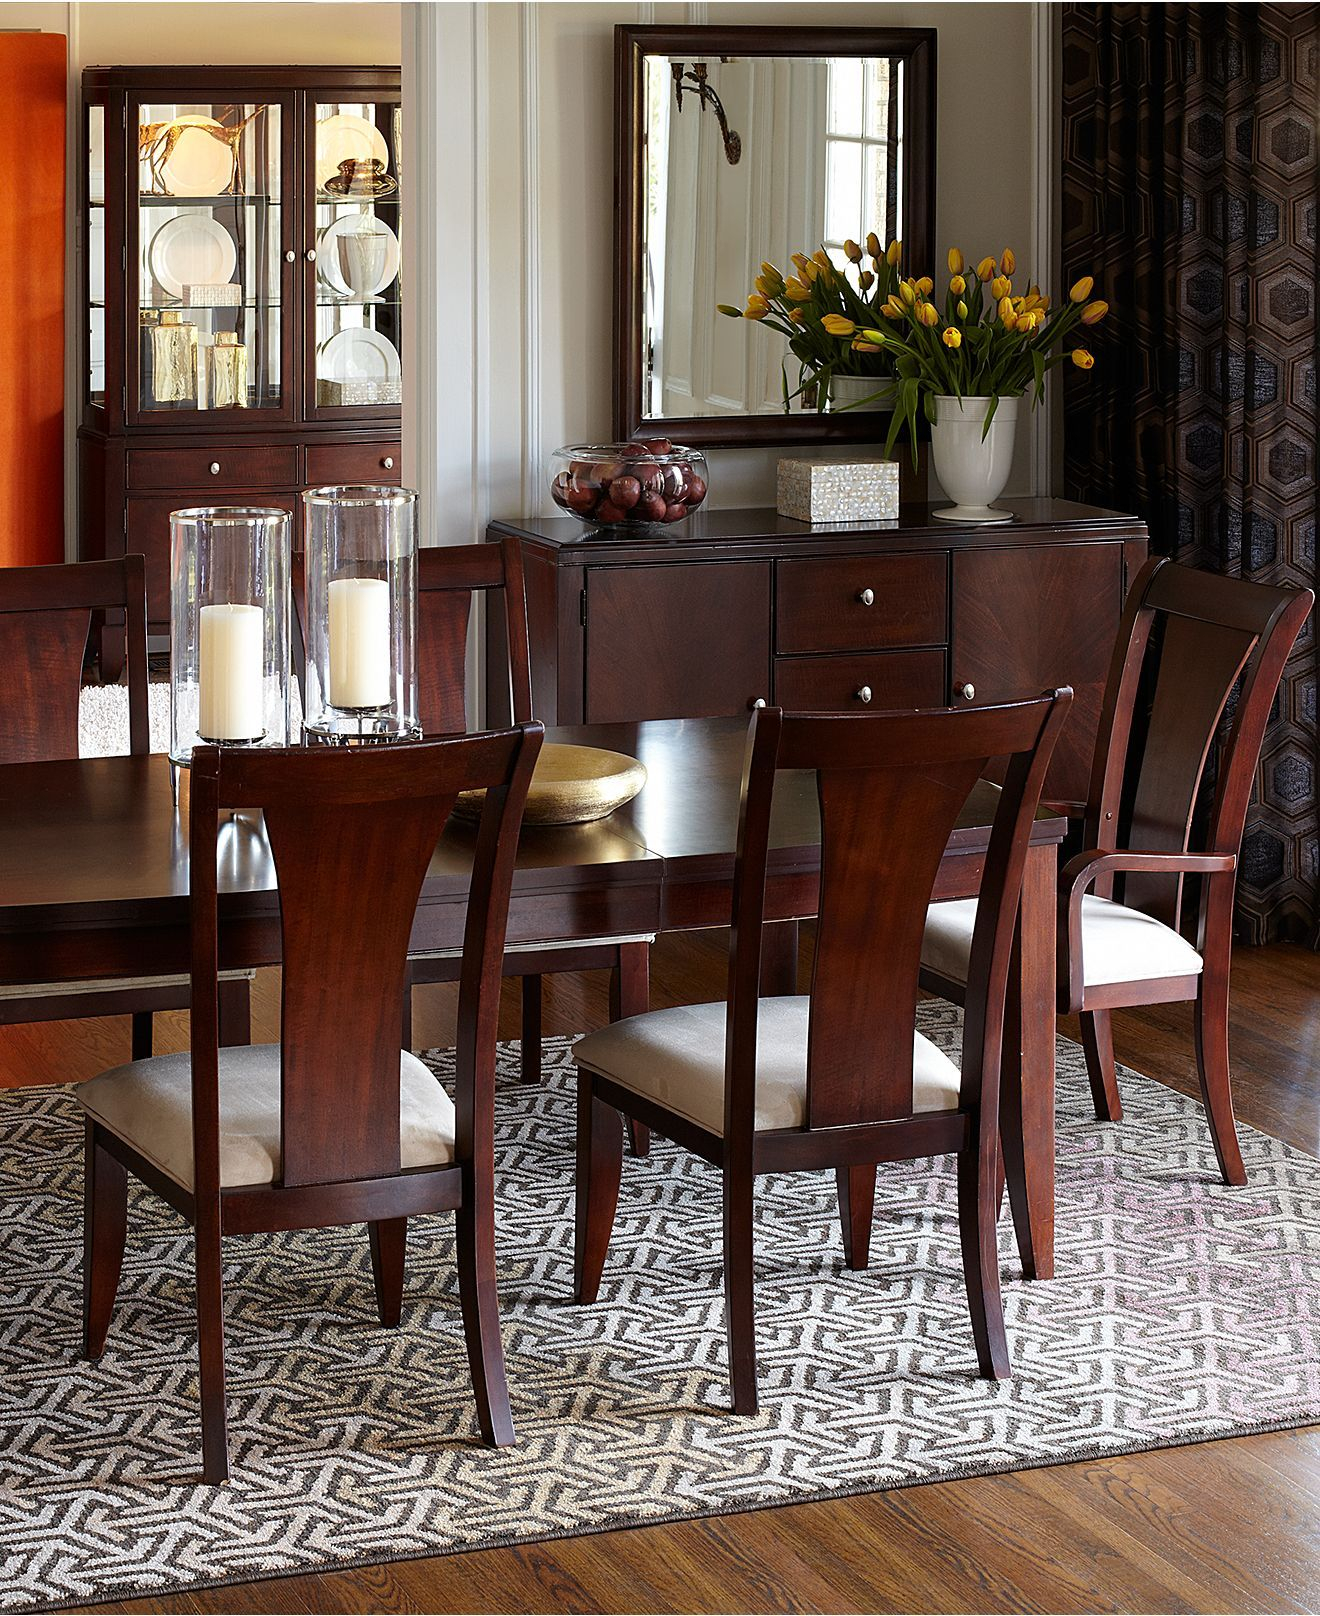 New Cheap Dining Room Furniture Johannesburg for Small Space